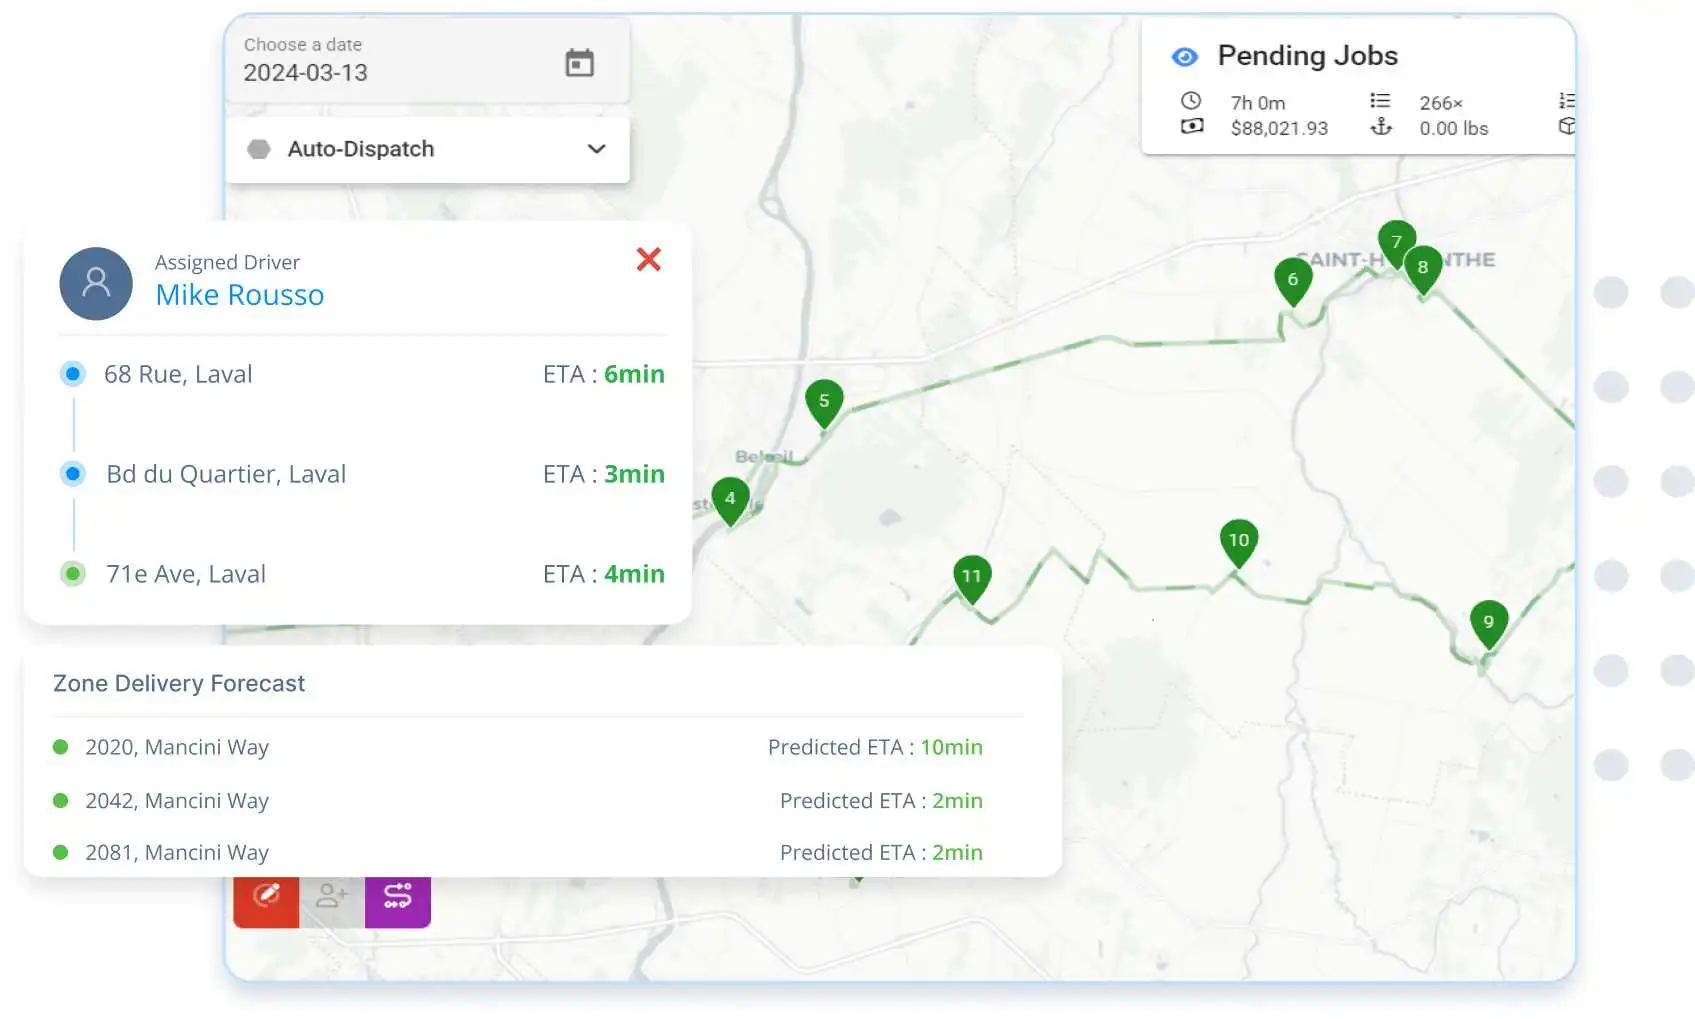 A screenshot of the last mile delivery tracking software interface, showing a map with various locations marked with pins indicating delivery destinations, an assigned driver's route, and estimated times of arrival at each point.